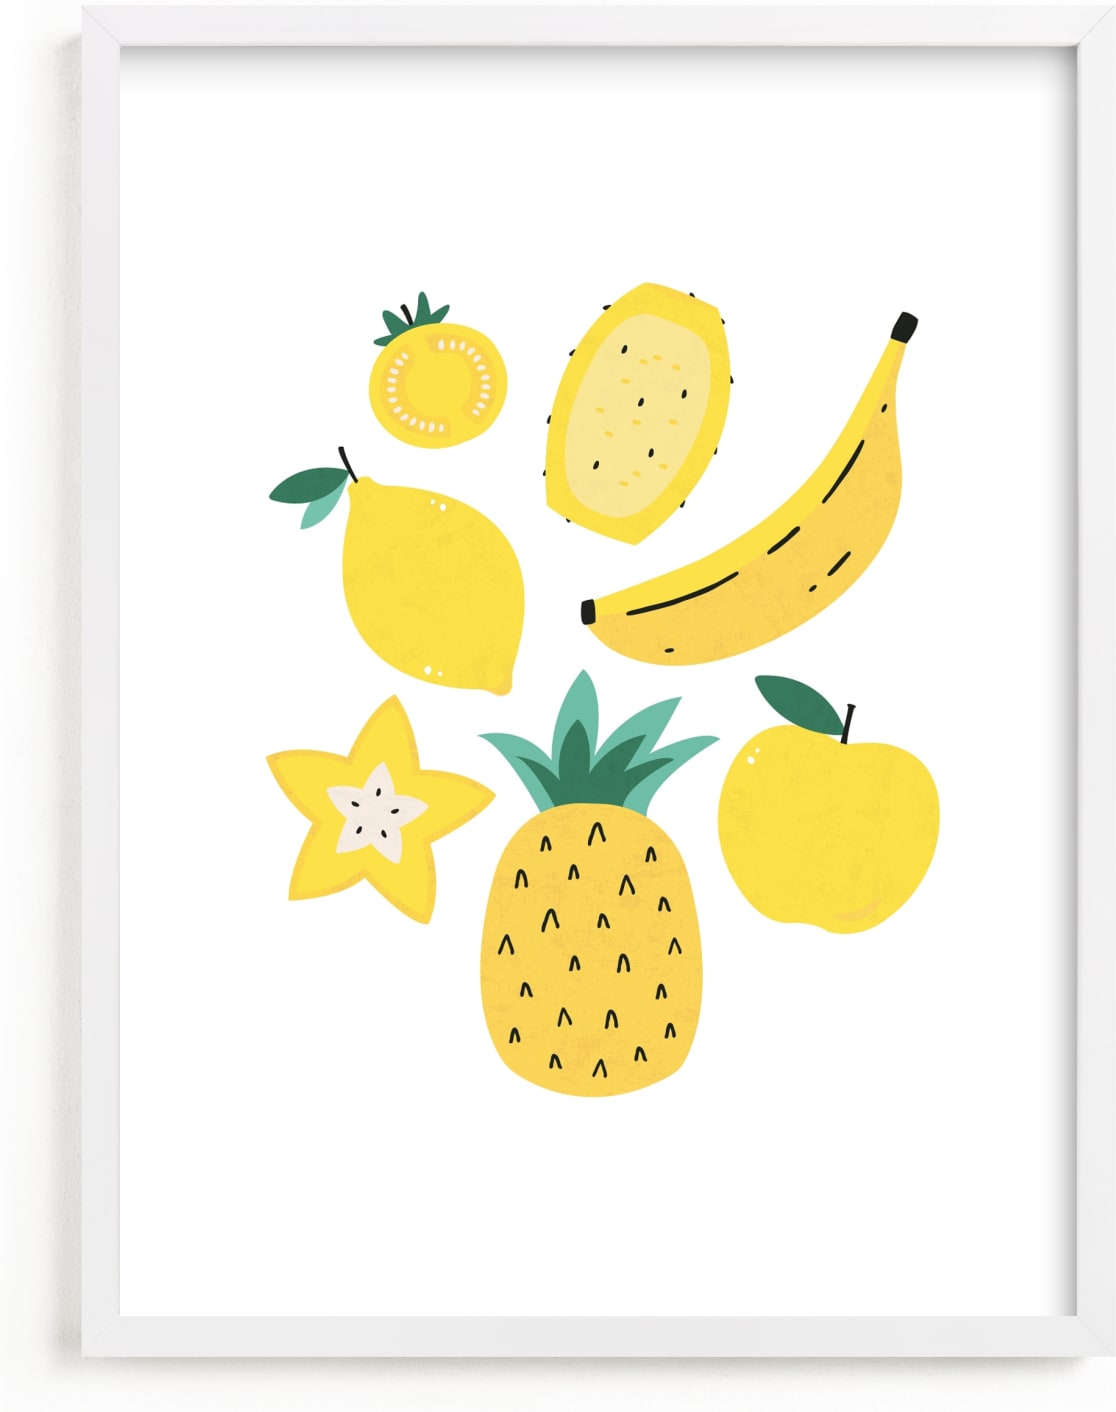 This is a white kids wall art by Erica Krystek called Monochrome Fruit No. 2.